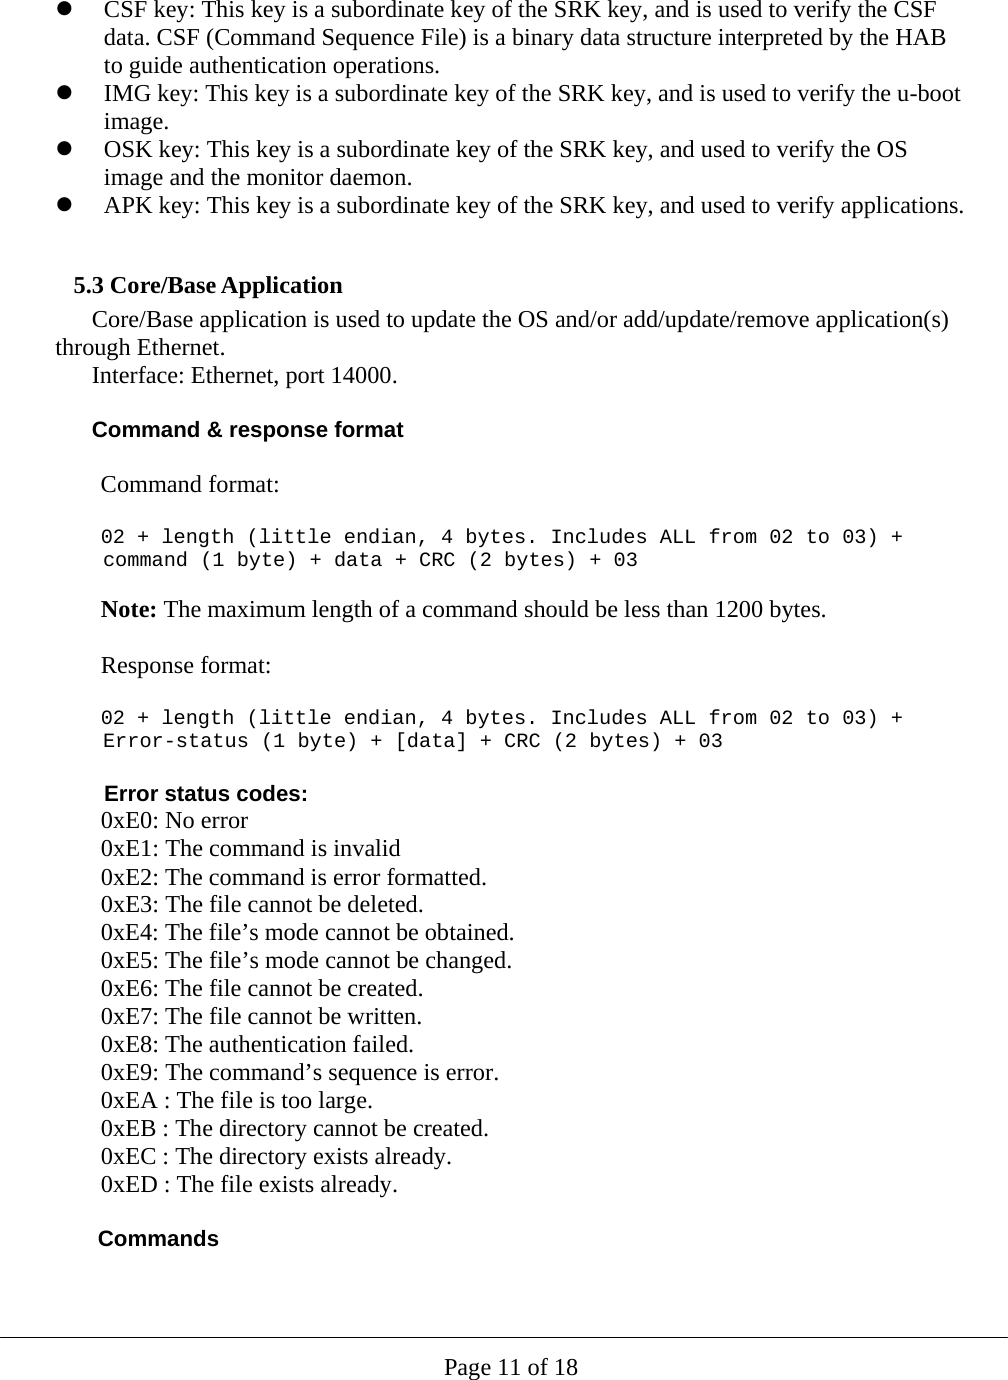  Page 11 of 18  CSF key: This key is a subordinate key of the SRK key, and is used to verify the CSF data. CSF (Command Sequence File) is a binary data structure interpreted by the HAB to guide authentication operations.  IMG key: This key is a subordinate key of the SRK key, and is used to verify the u-boot image.  OSK key: This key is a subordinate key of the SRK key, and used to verify the OS image and the monitor daemon.  APK key: This key is a subordinate key of the SRK key, and used to verify applications.     5.3 Core/Base Application Core/Base application is used to update the OS and/or add/update/remove application(s) through Ethernet. Interface: Ethernet, port 14000.  Command &amp; response format  Command format:  02 + length (little endian, 4 bytes. Includes ALL from 02 to 03) + command (1 byte) + data + CRC (2 bytes) + 03  Note: The maximum length of a command should be less than 1200 bytes.  Response format:  02 + length (little endian, 4 bytes. Includes ALL from 02 to 03) + Error-status (1 byte) + [data] + CRC (2 bytes) + 03   Error status codes: 0xE0: No error 0xE1: The command is invalid 0xE2: The command is error formatted. 0xE3: The file cannot be deleted. 0xE4: The file’s mode cannot be obtained.   0xE5: The file’s mode cannot be changed. 0xE6: The file cannot be created. 0xE7: The file cannot be written. 0xE8: The authentication failed. 0xE9: The command’s sequence is error. 0xEA : The file is too large. 0xEB : The directory cannot be created. 0xEC : The directory exists already. 0xED : The file exists already.  Commands  